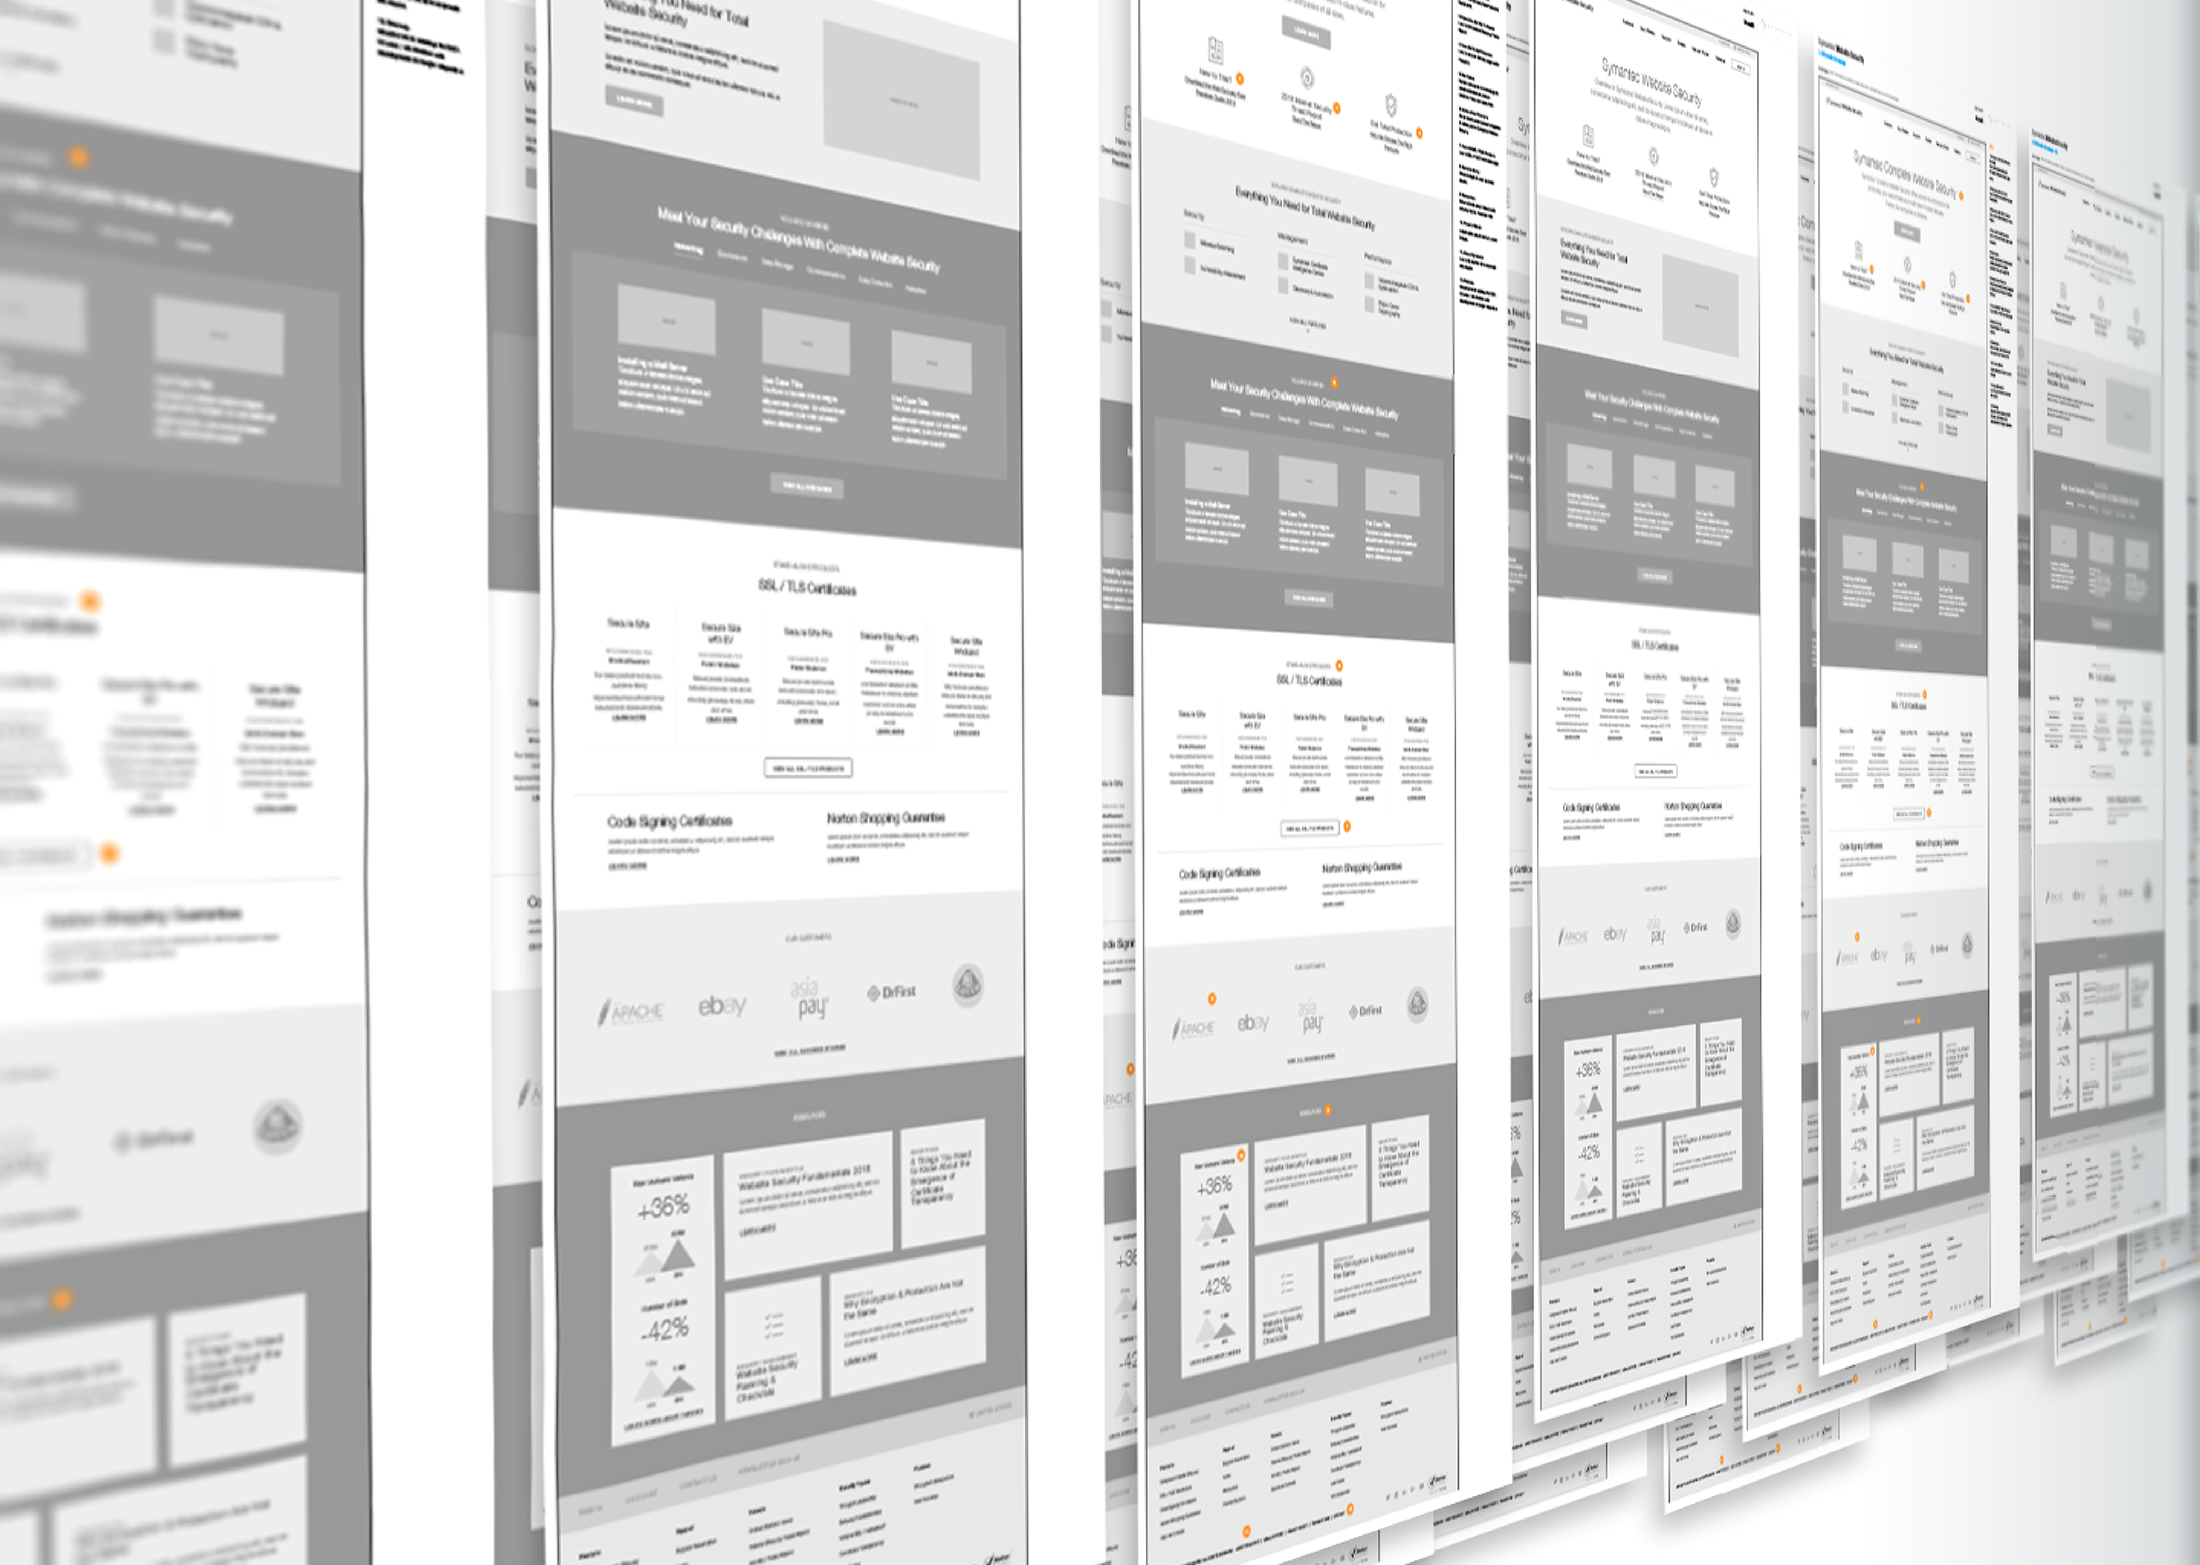 Grouping of several wireframes depicting the Symantec website design.